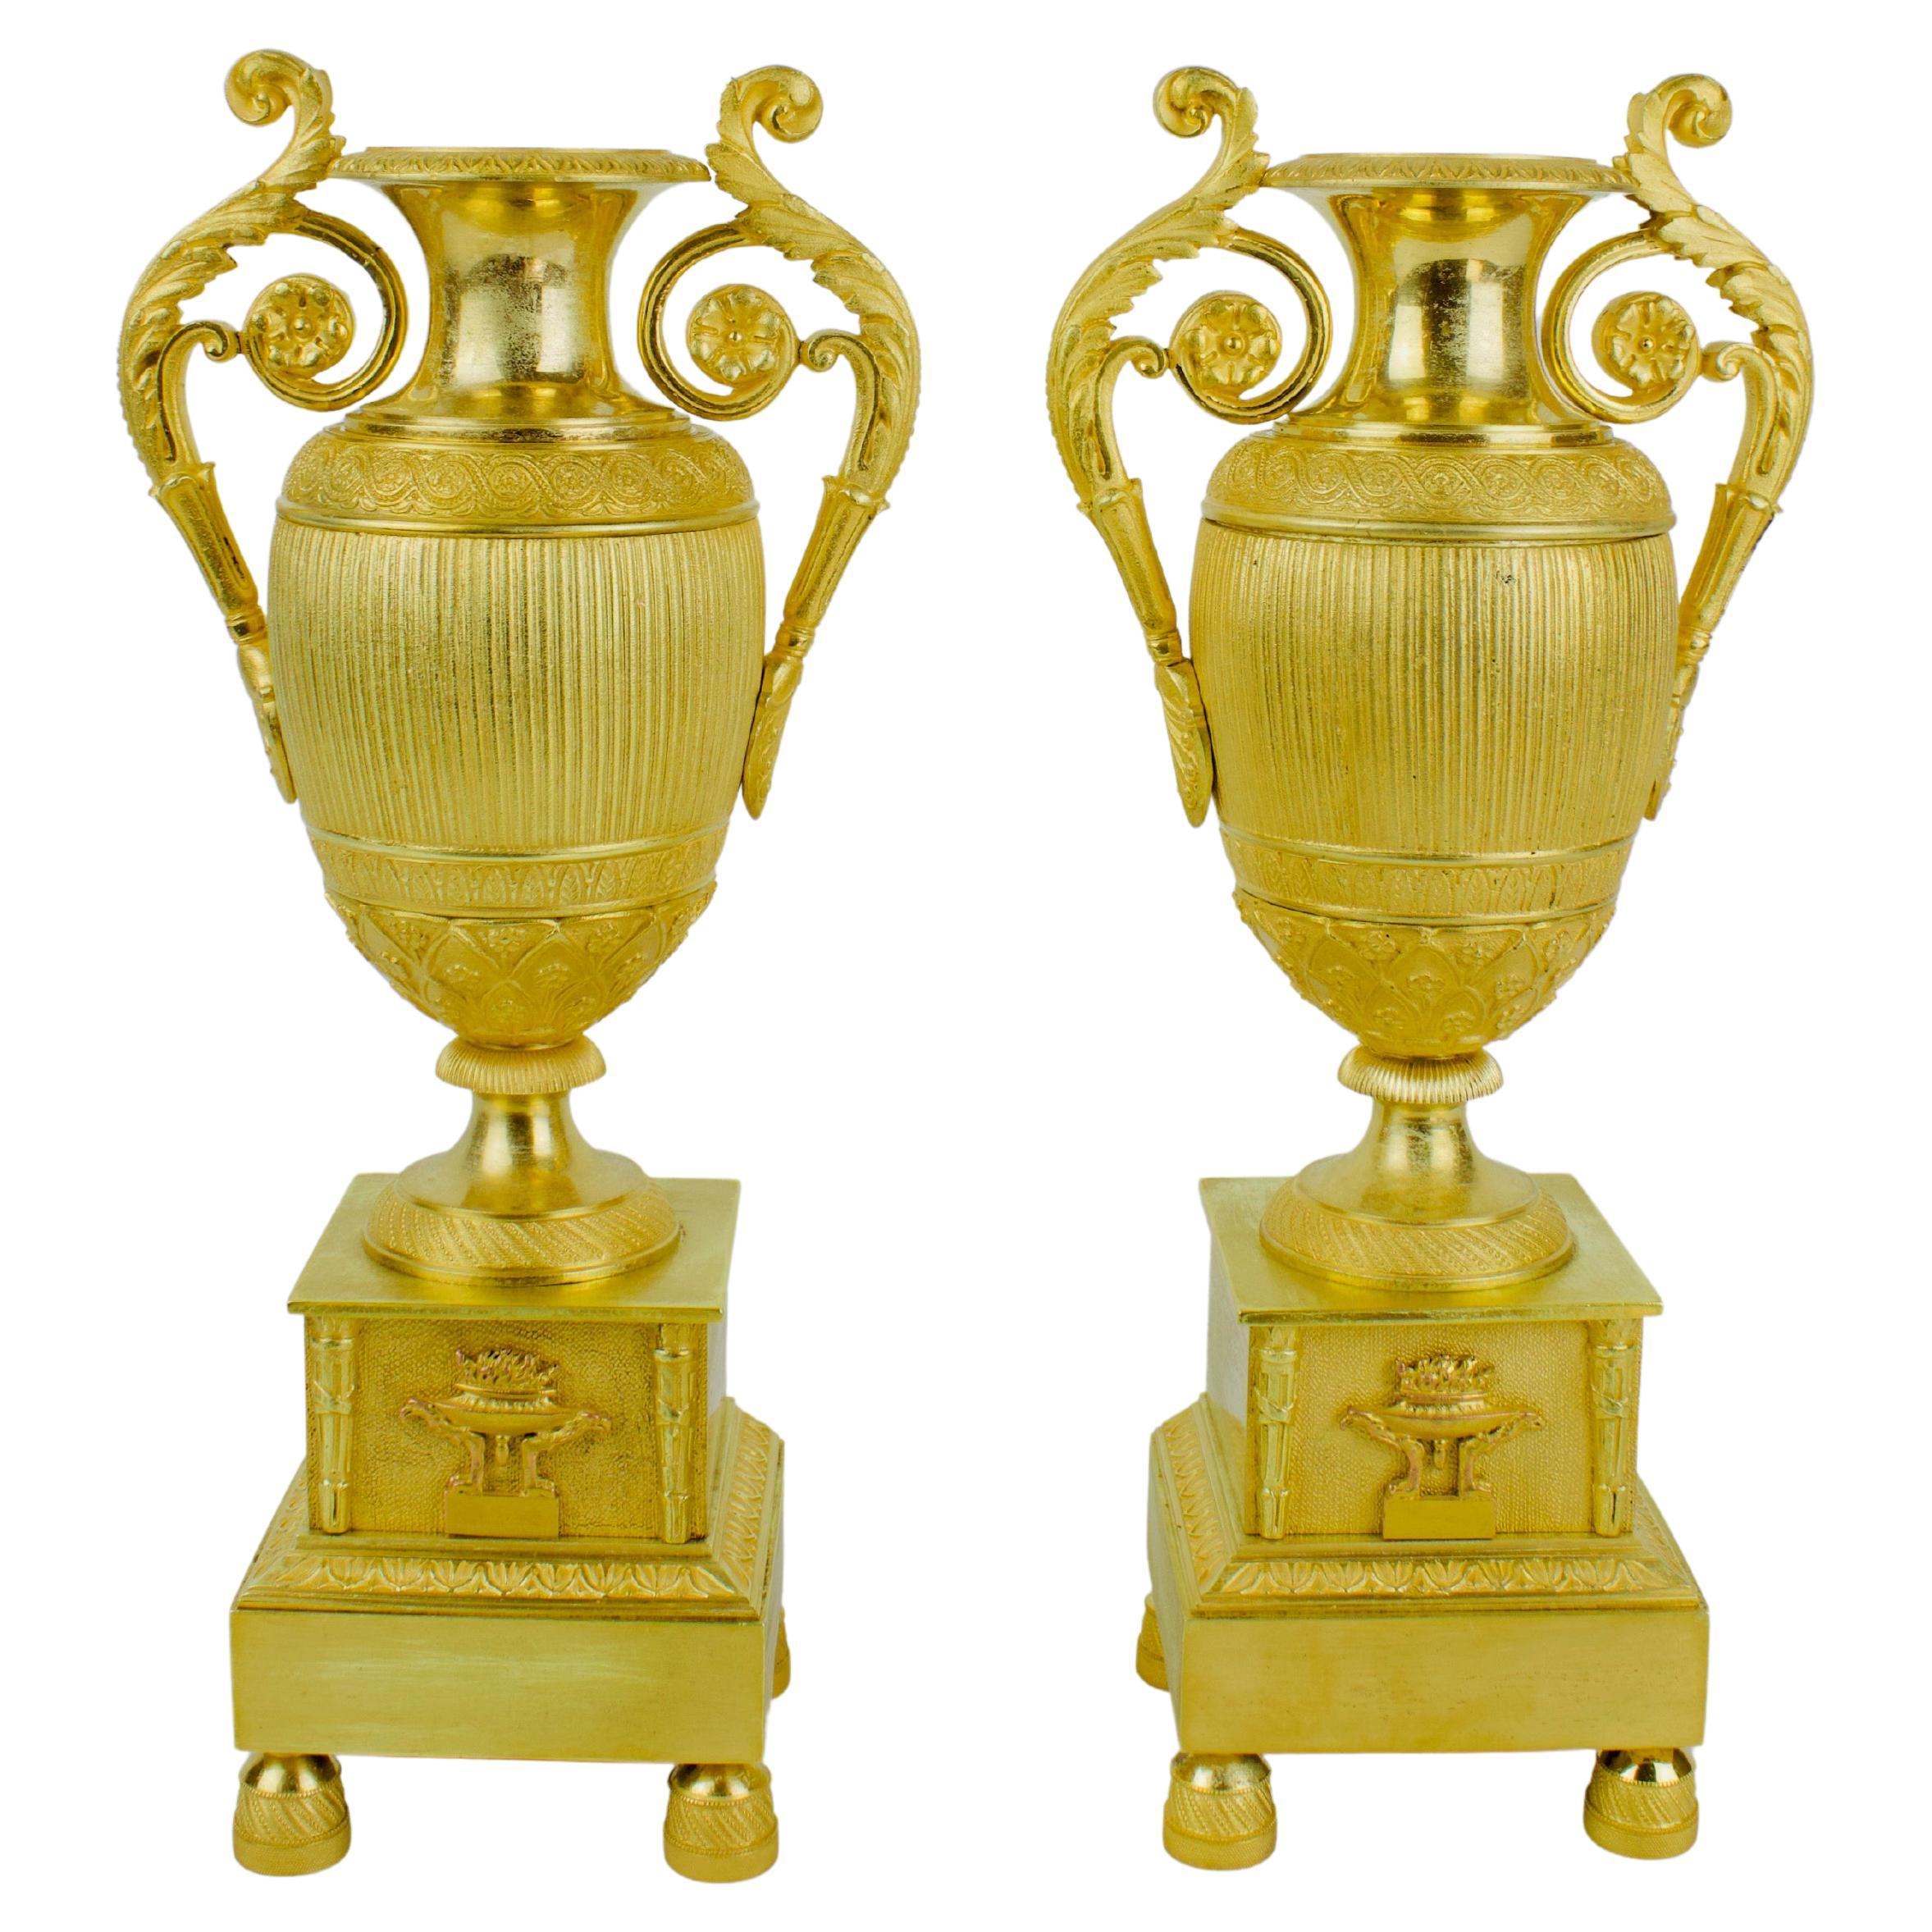 Pair of Early 19th Century Empire Gilt Bronze Neoclassical Vases